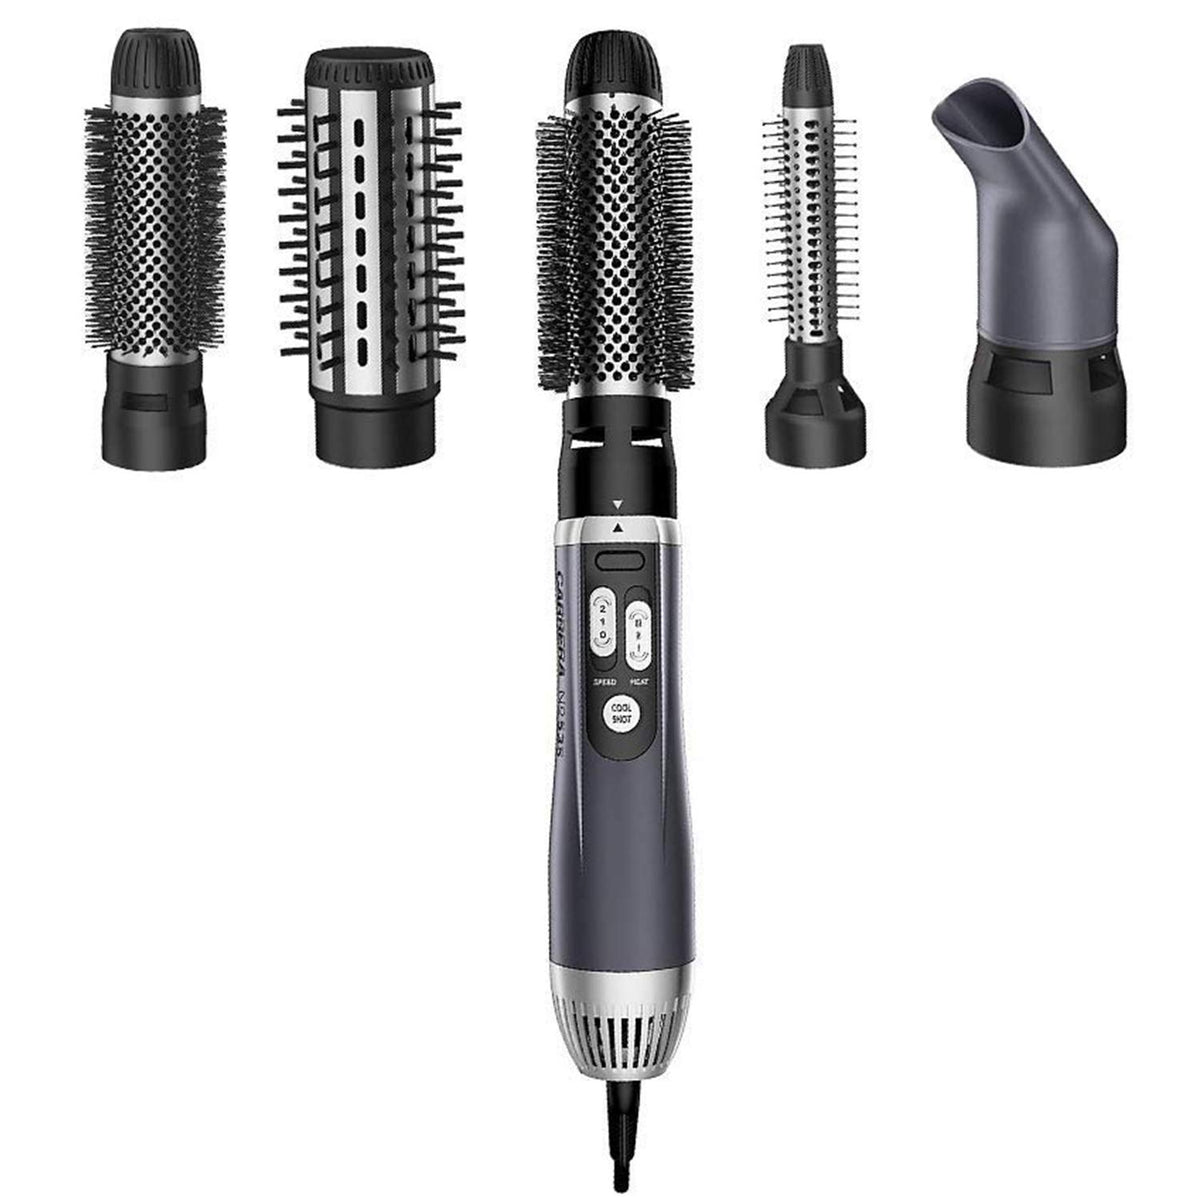 Carrera, Professional Hot Air Brush Styler for Women, Hot Hair Straightener, Curler for Volume with Styling Nozzles, NO535